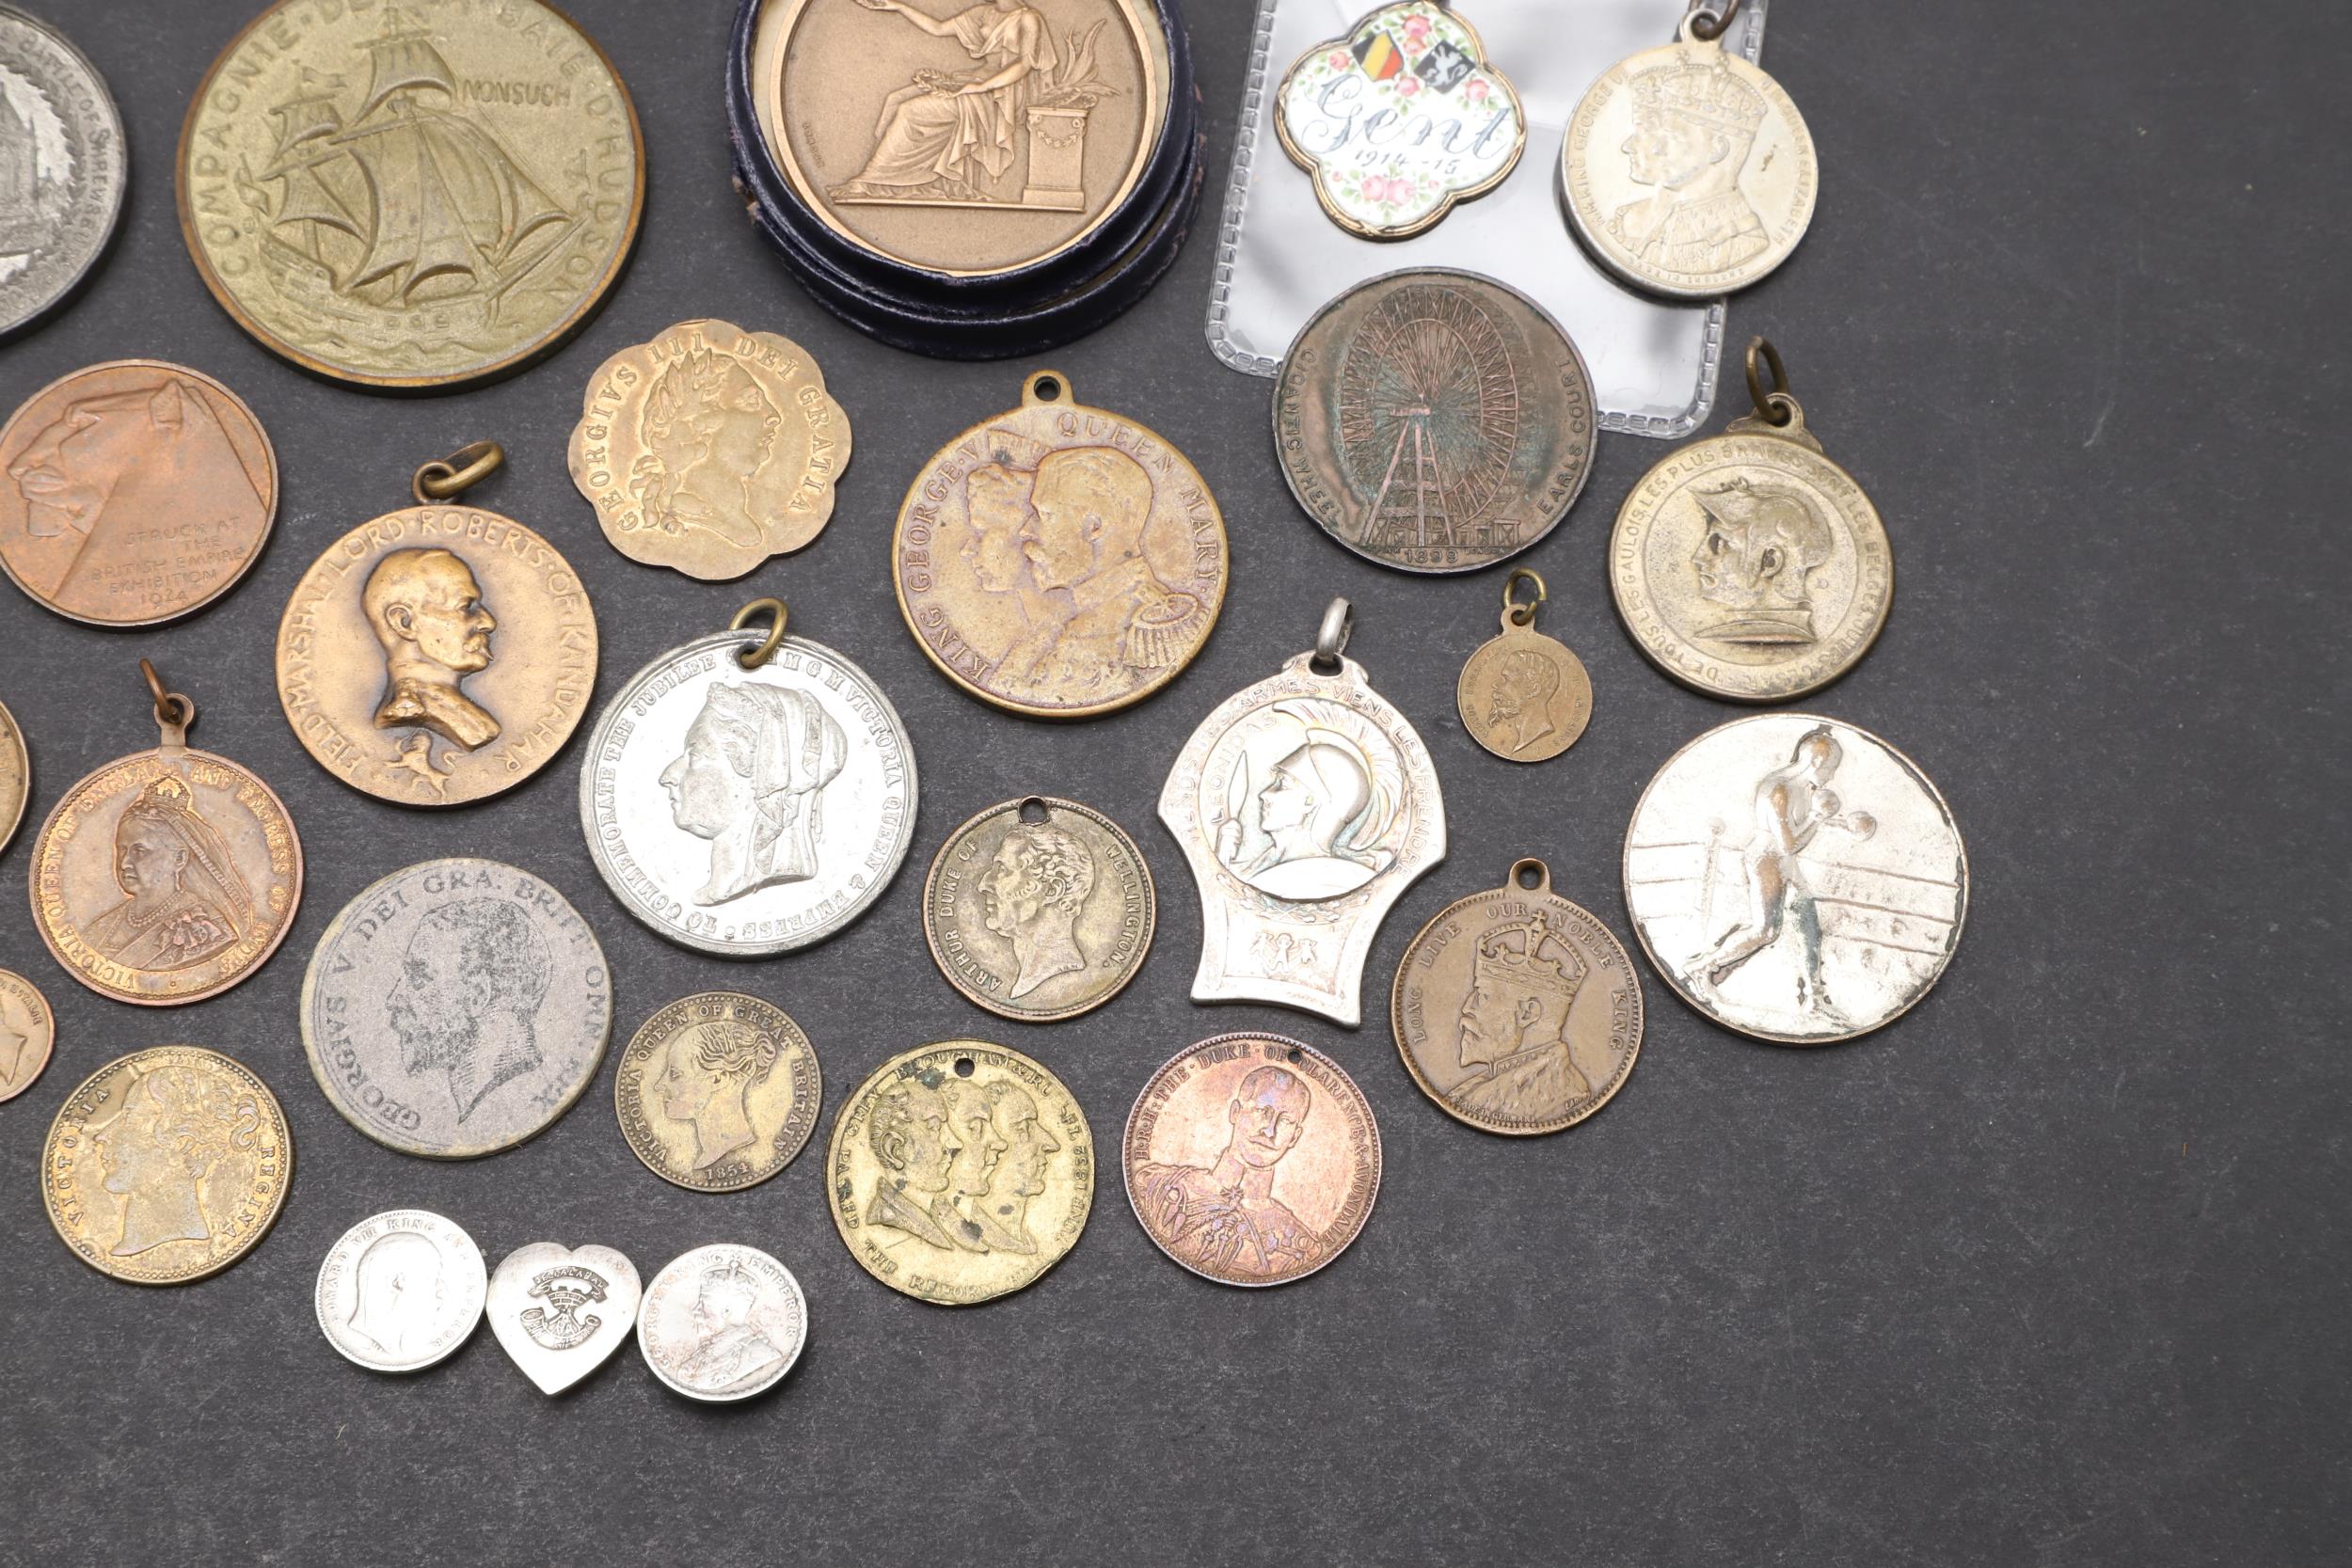 A COLLECTION OF COMMEMORATIVE AND SPORTING MEDALS. - Image 7 of 15